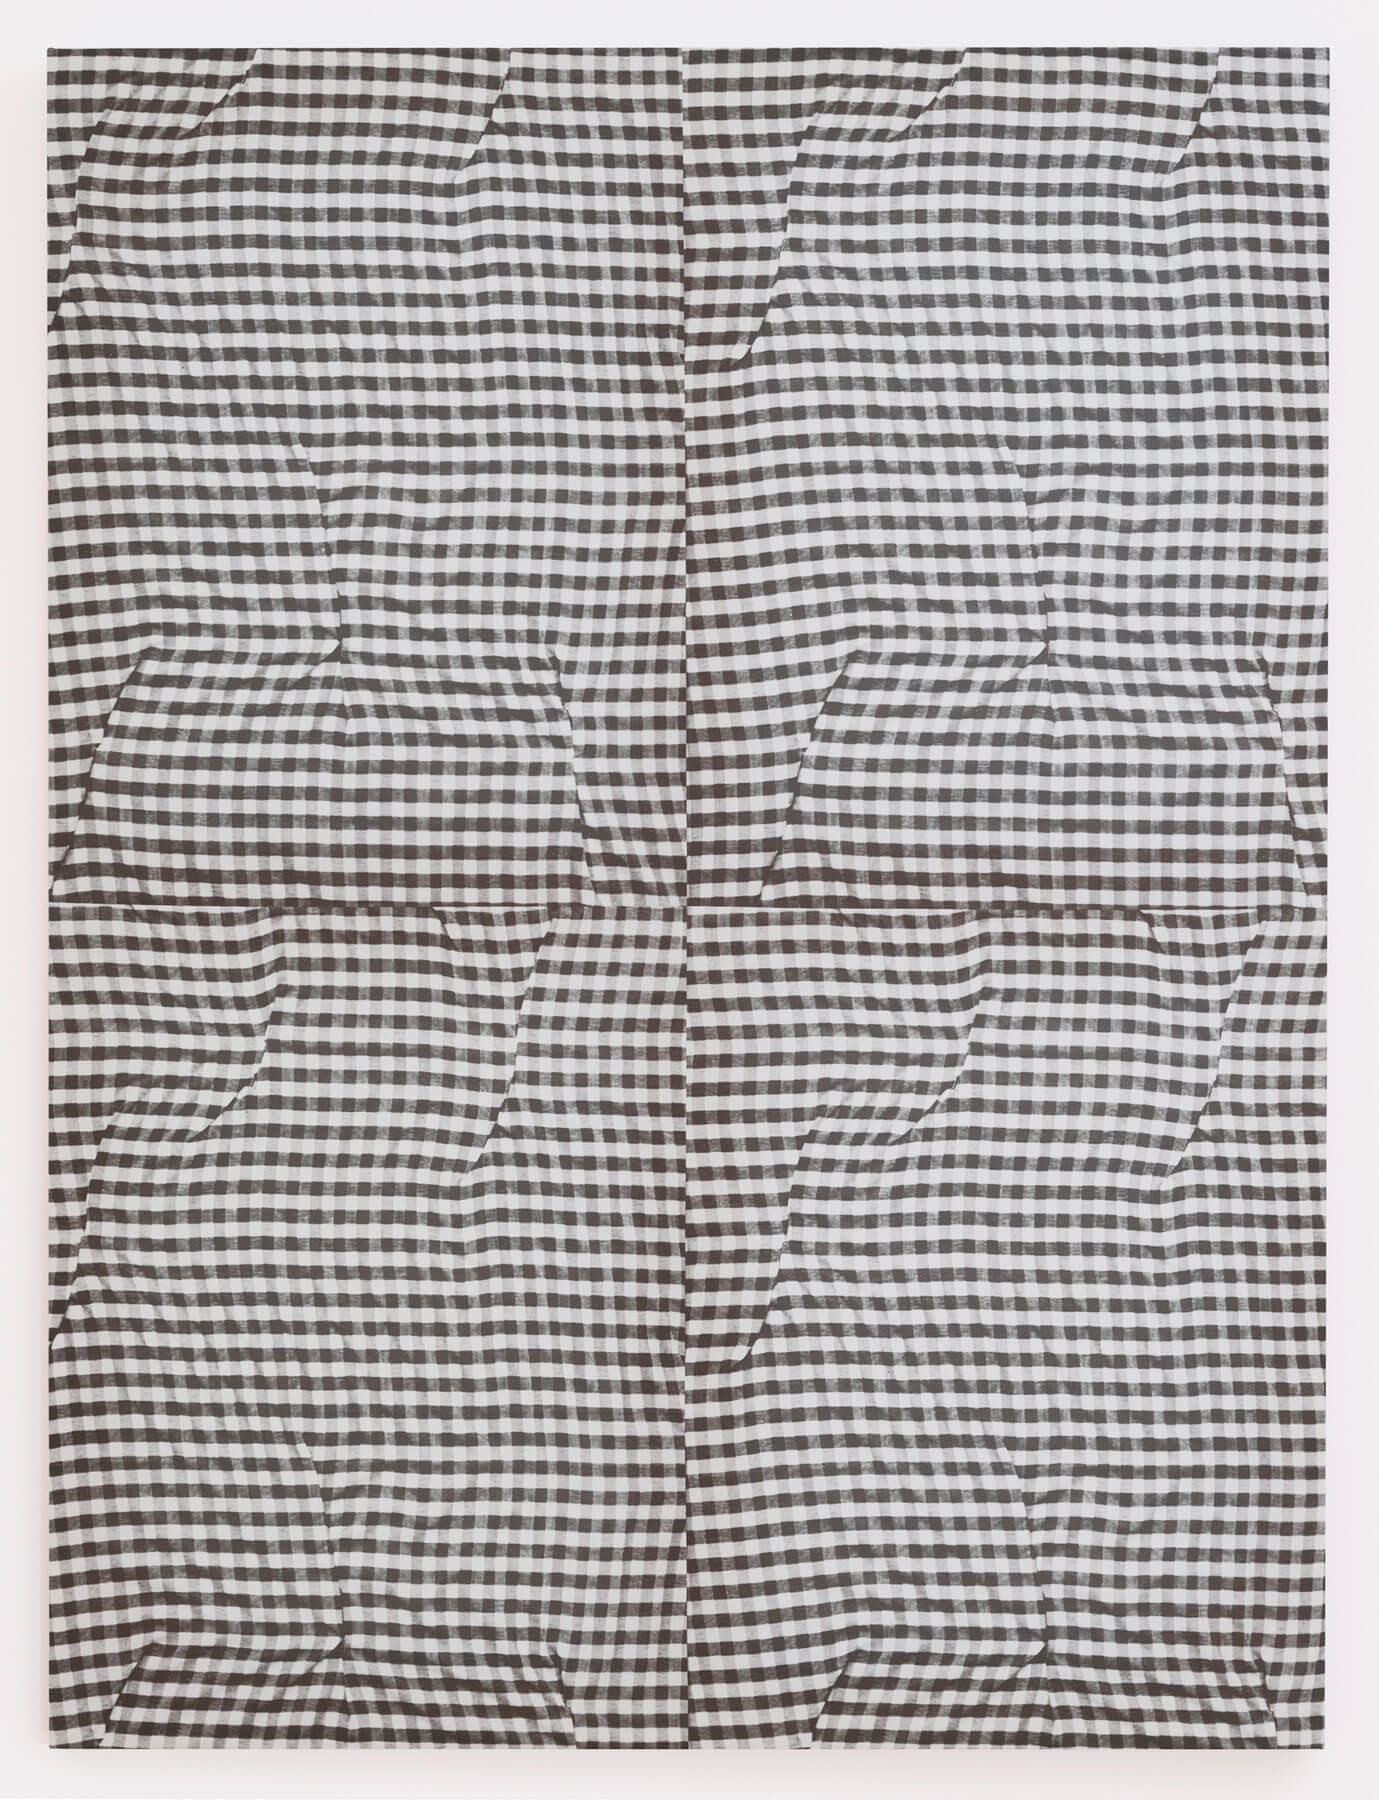 Cheryl Donegan
                                            'Untitled (grey folds)', 2014
                                            48 x 36 Inches
                                            dyed cotton
                                            